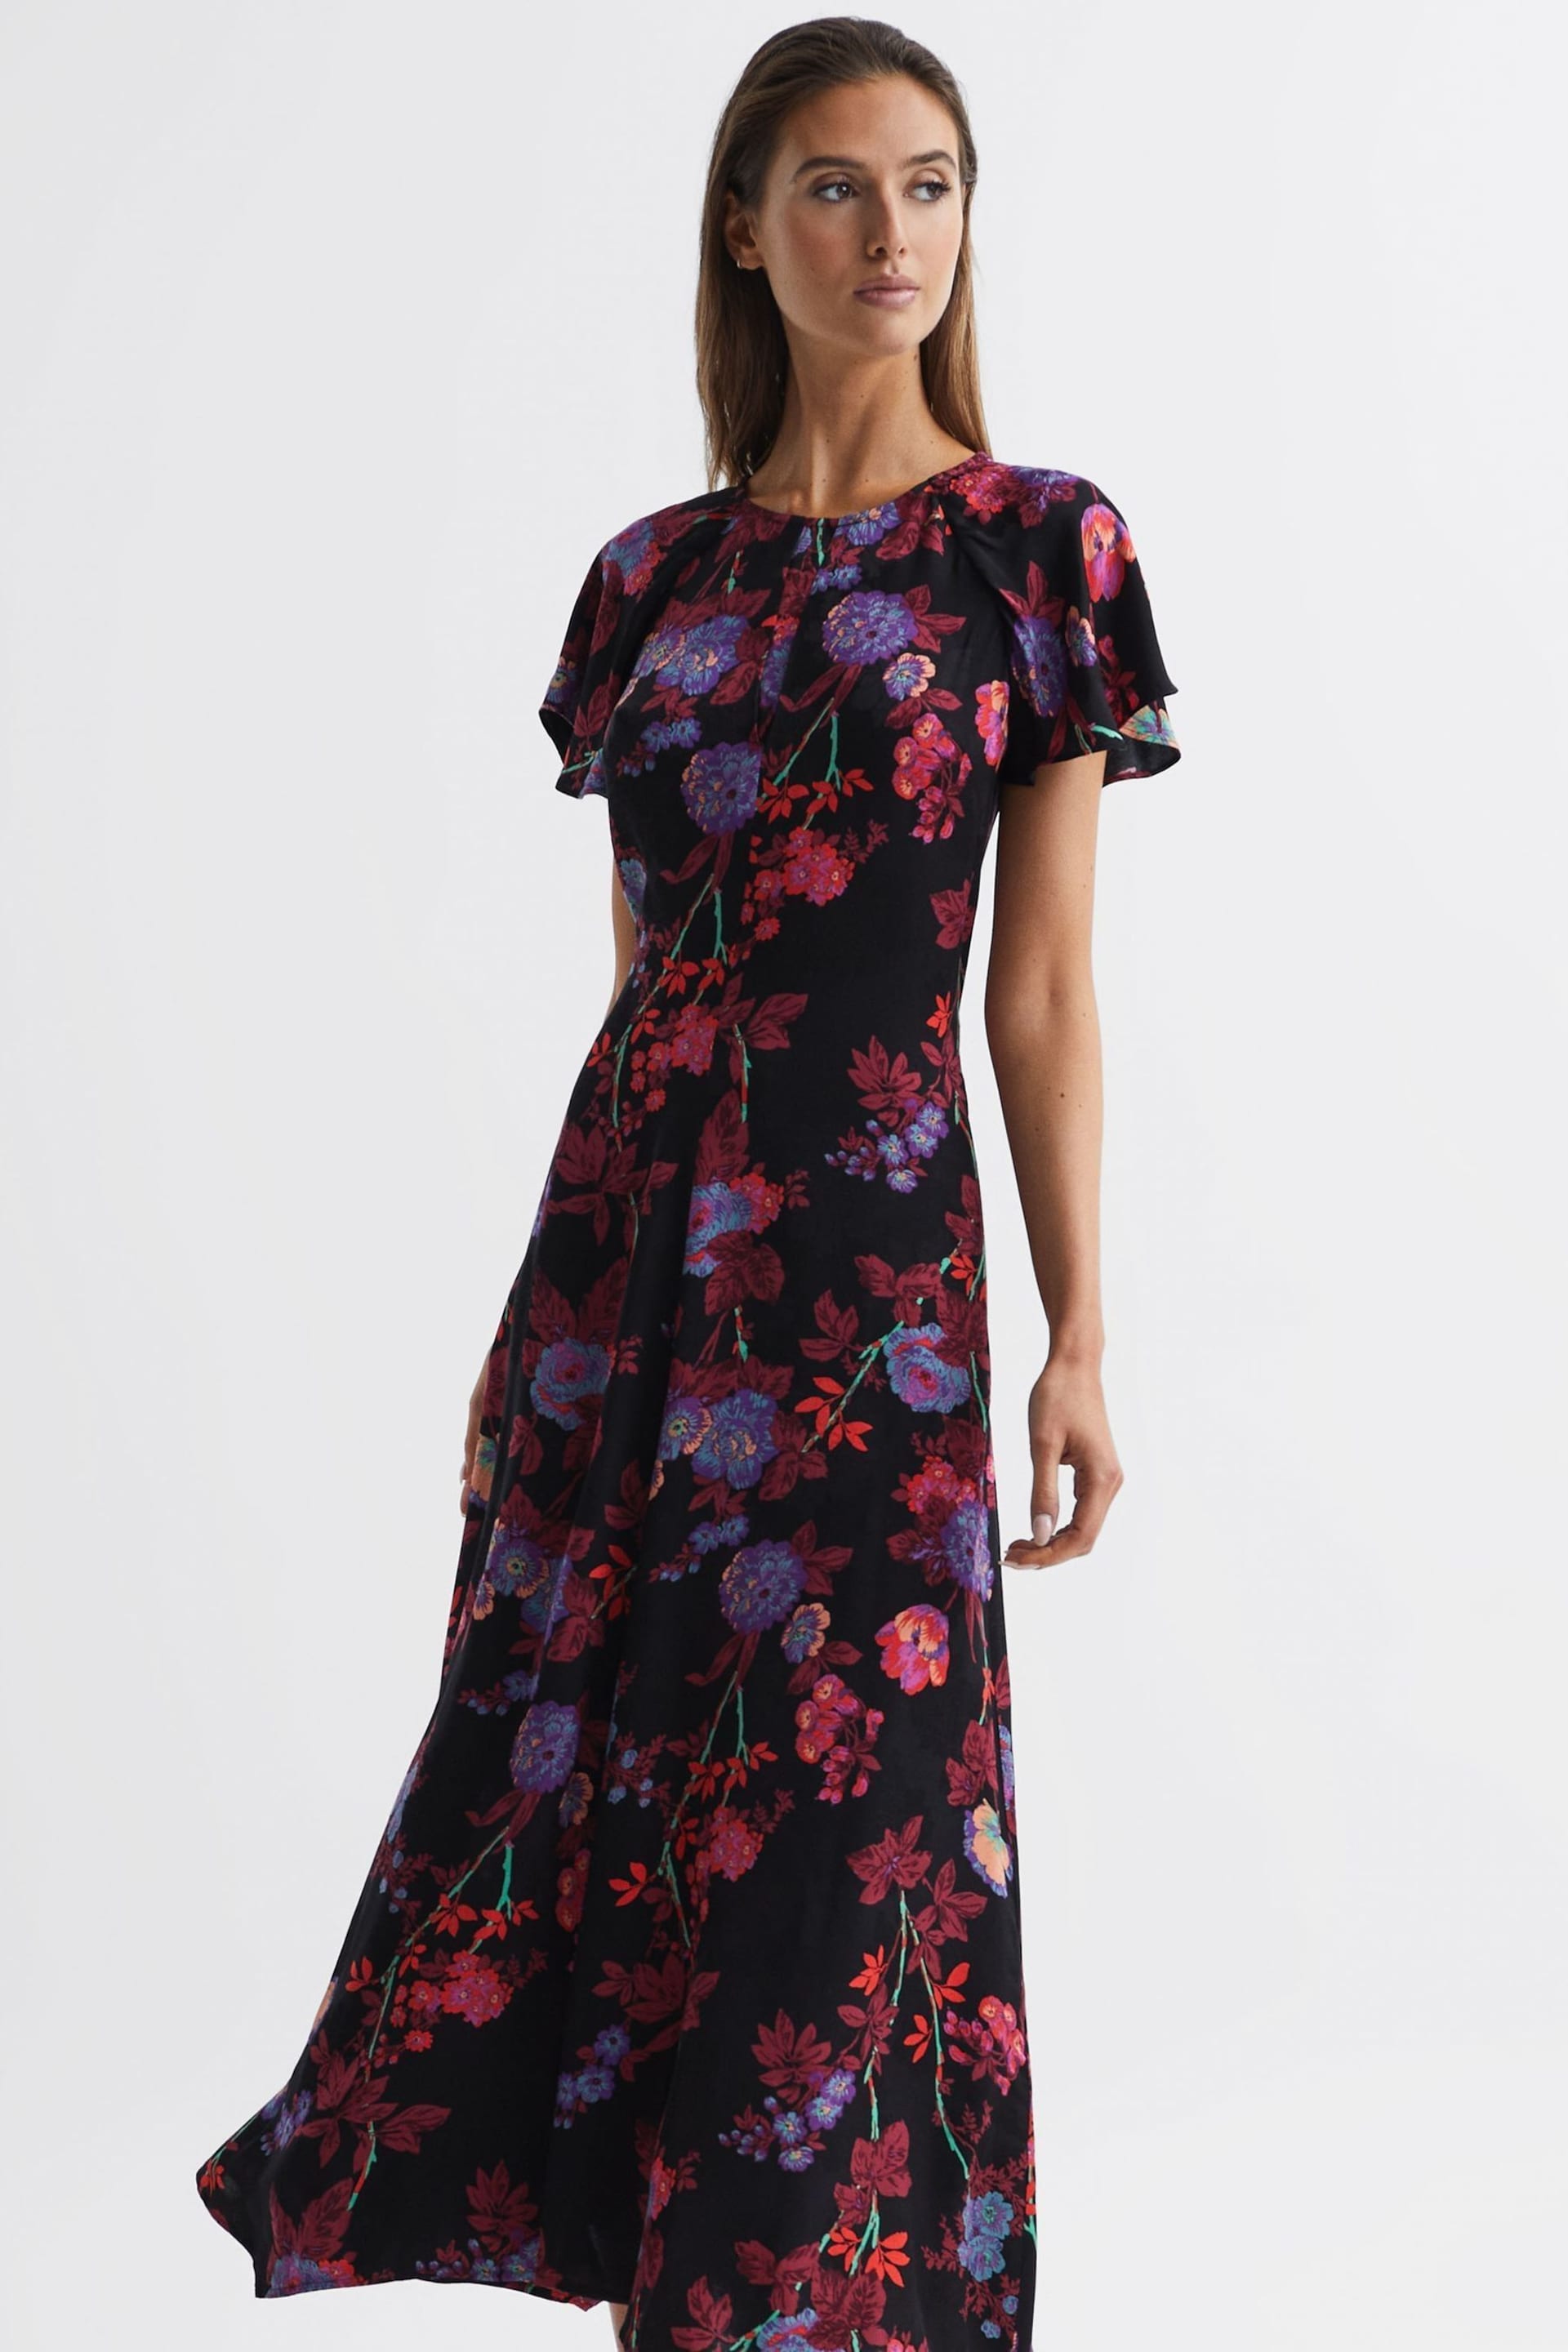 Reiss Black/Pink Leni Fitted Floral Print Midi Dress - Image 6 of 7